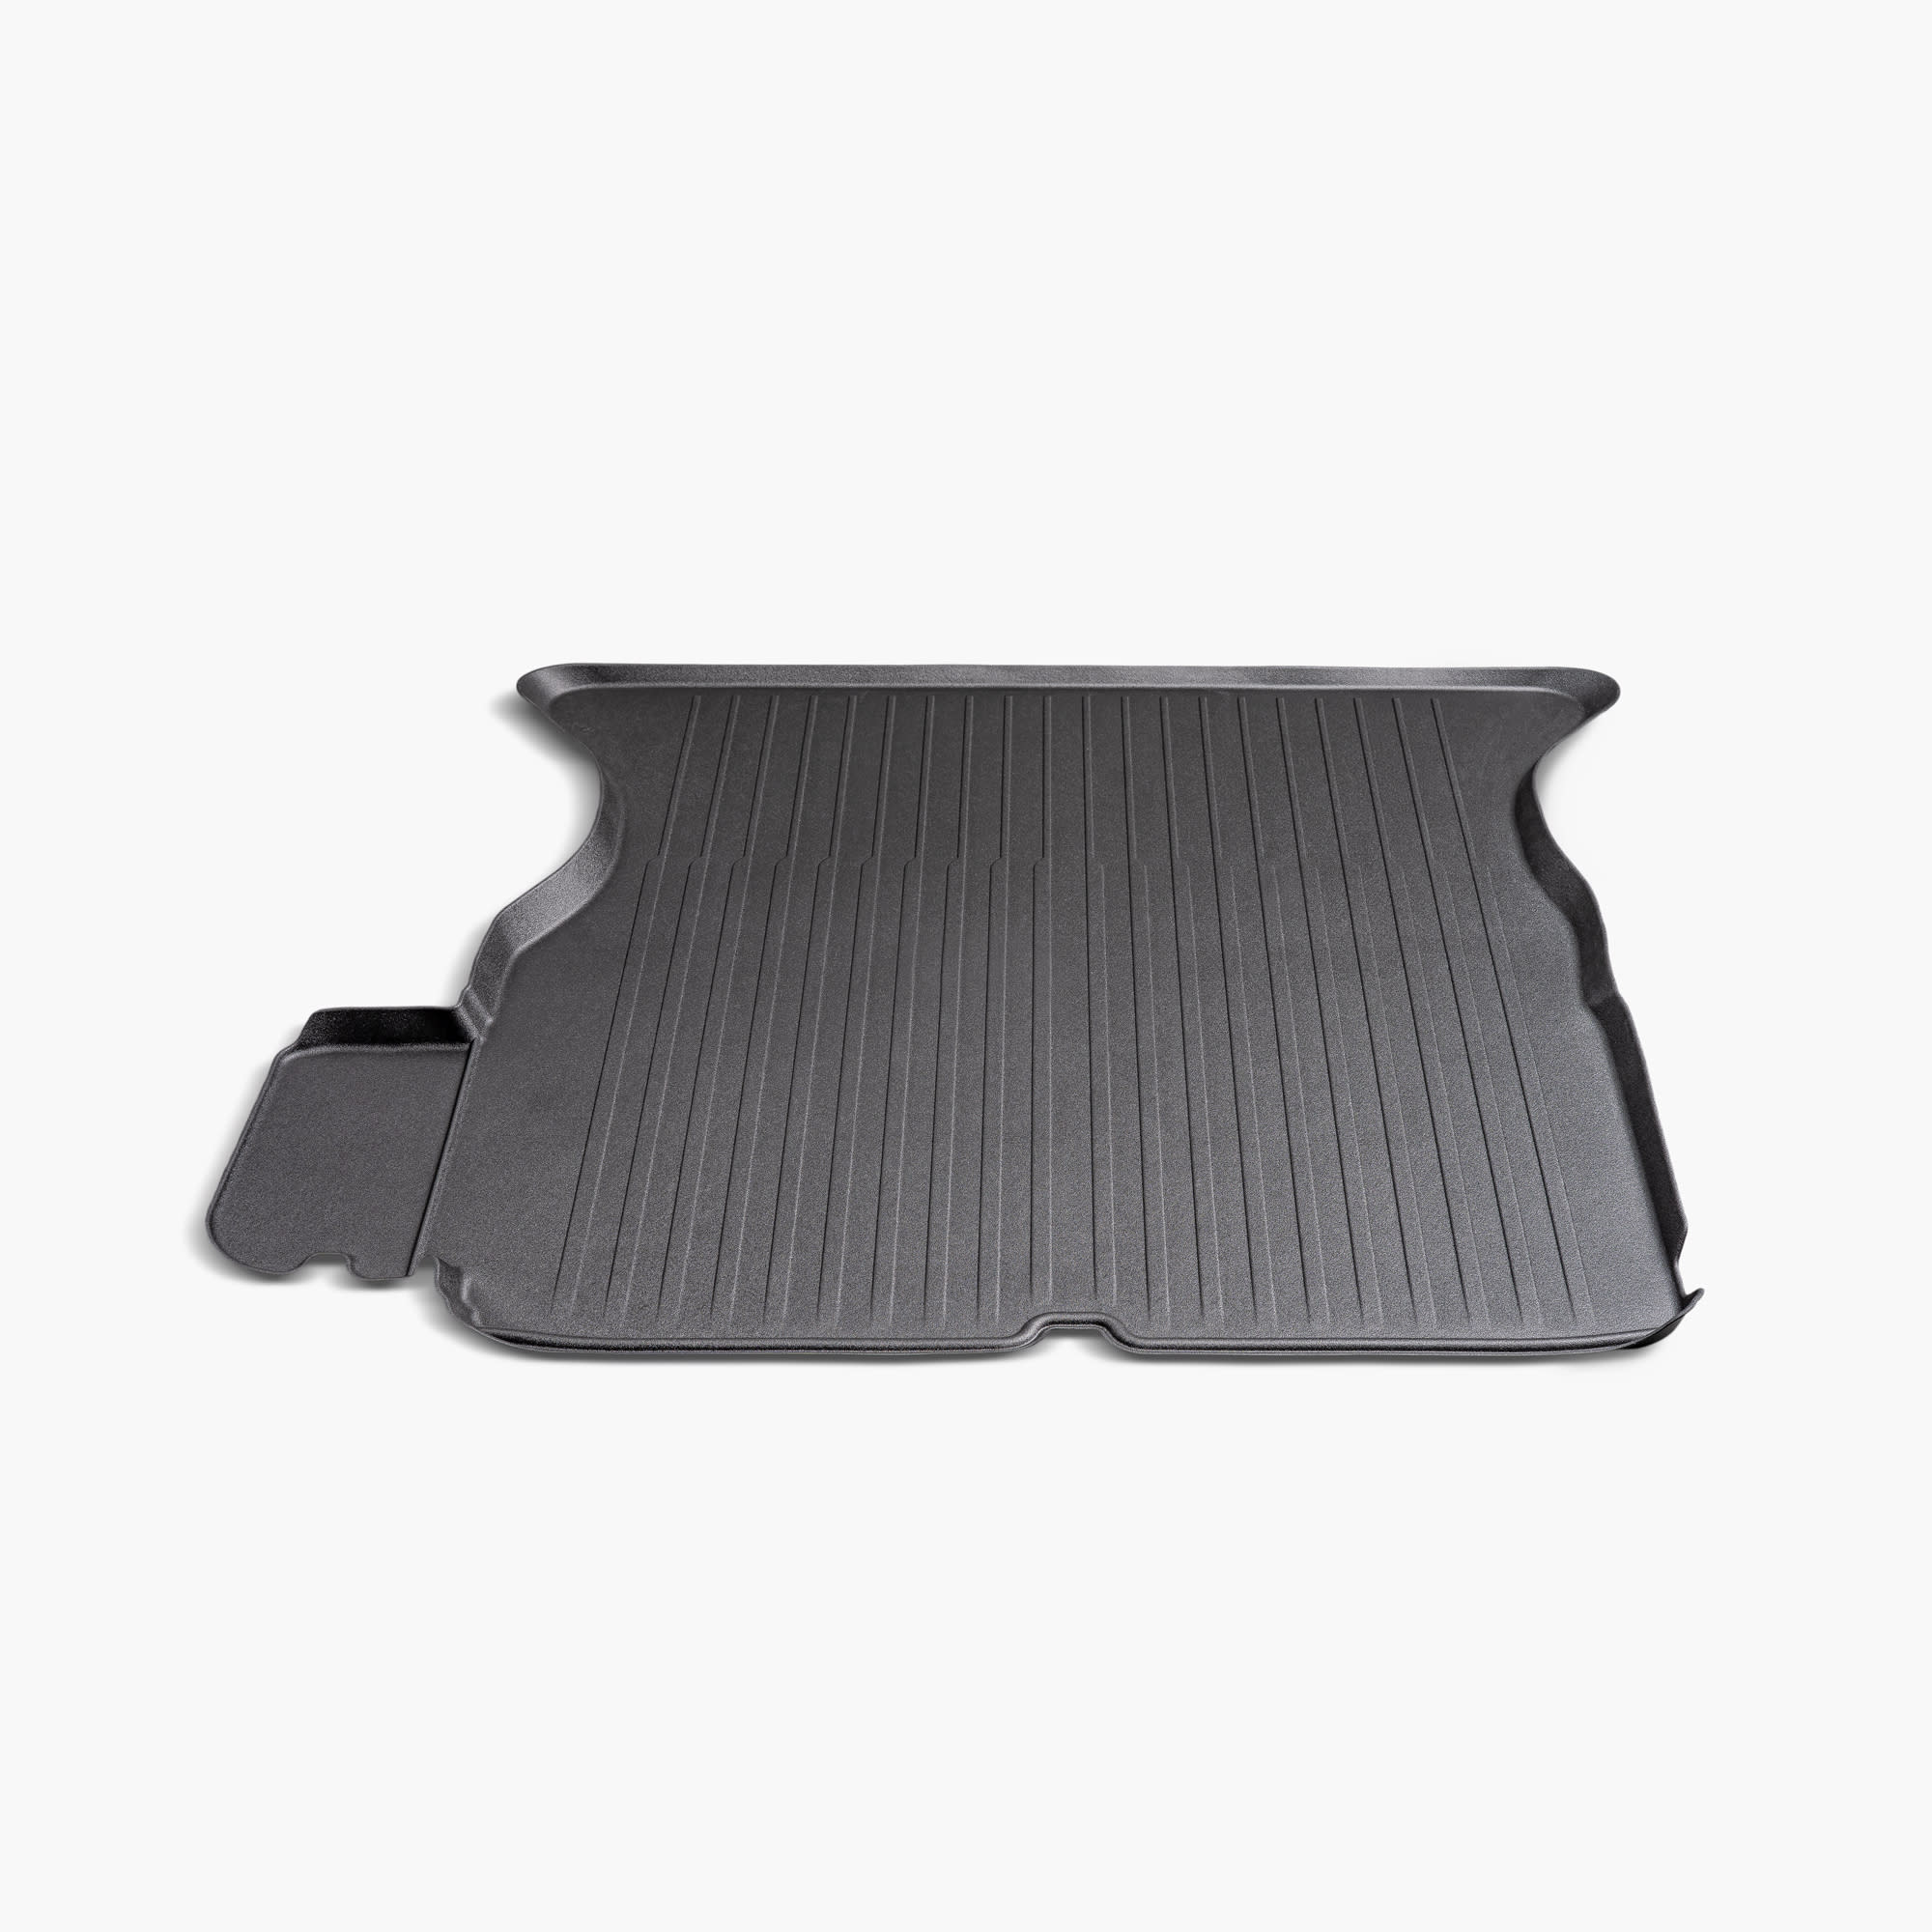 Model X All-Weather Rear Cargo Liner Set